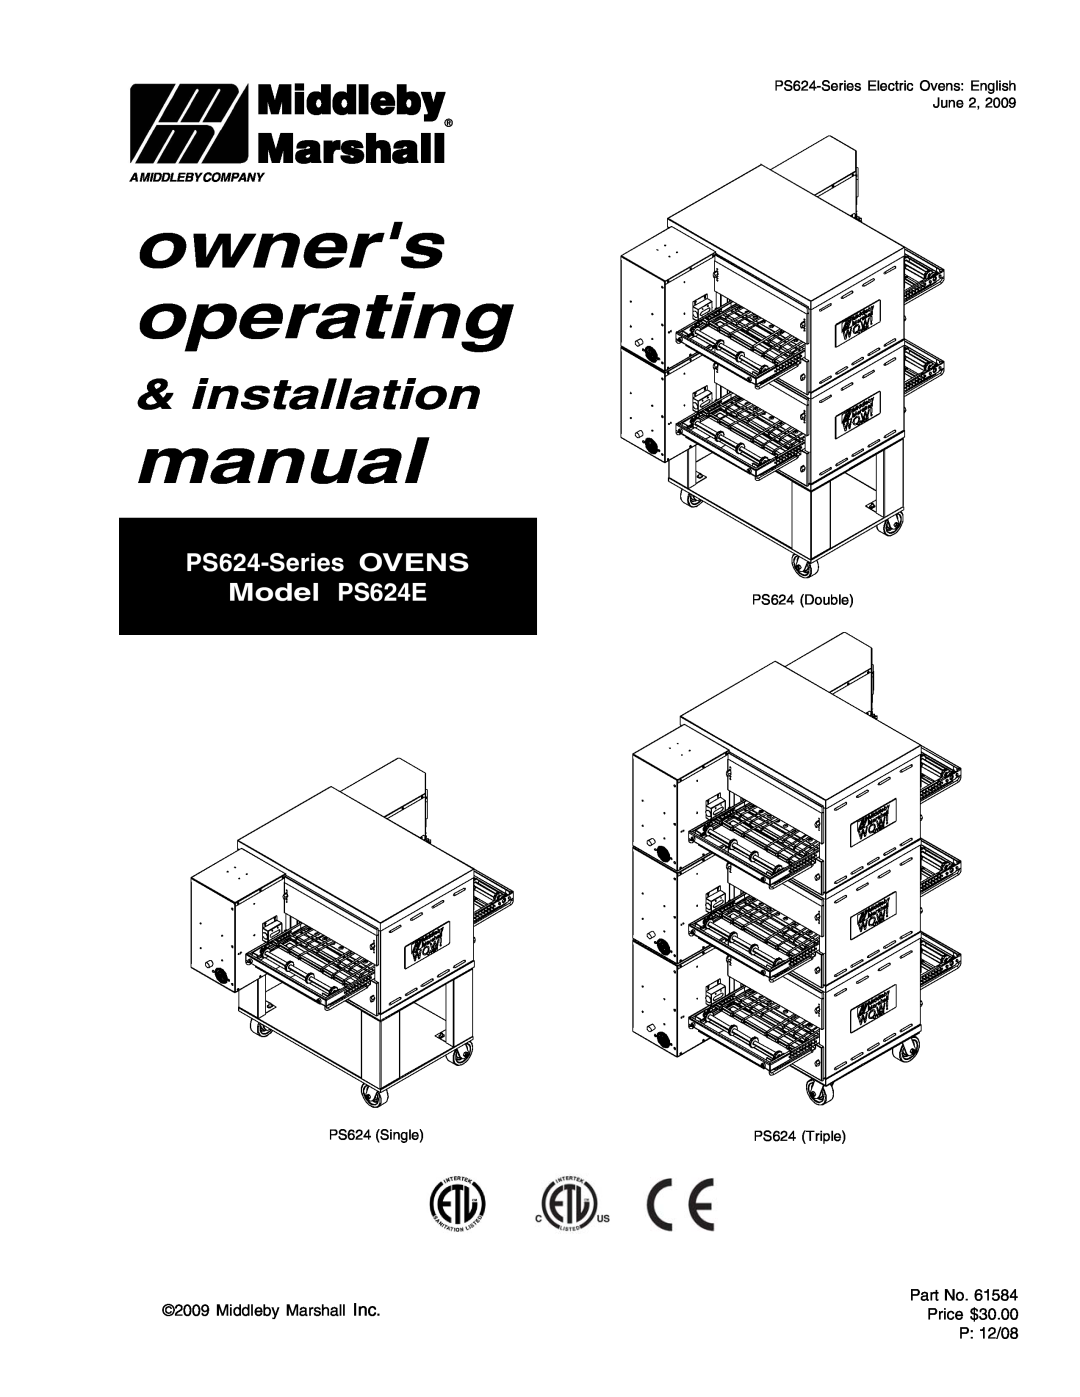 Middleby Marshall installation manual owners operating, Middleby, Marshall, PS624-Series OVENS Model PS624E 